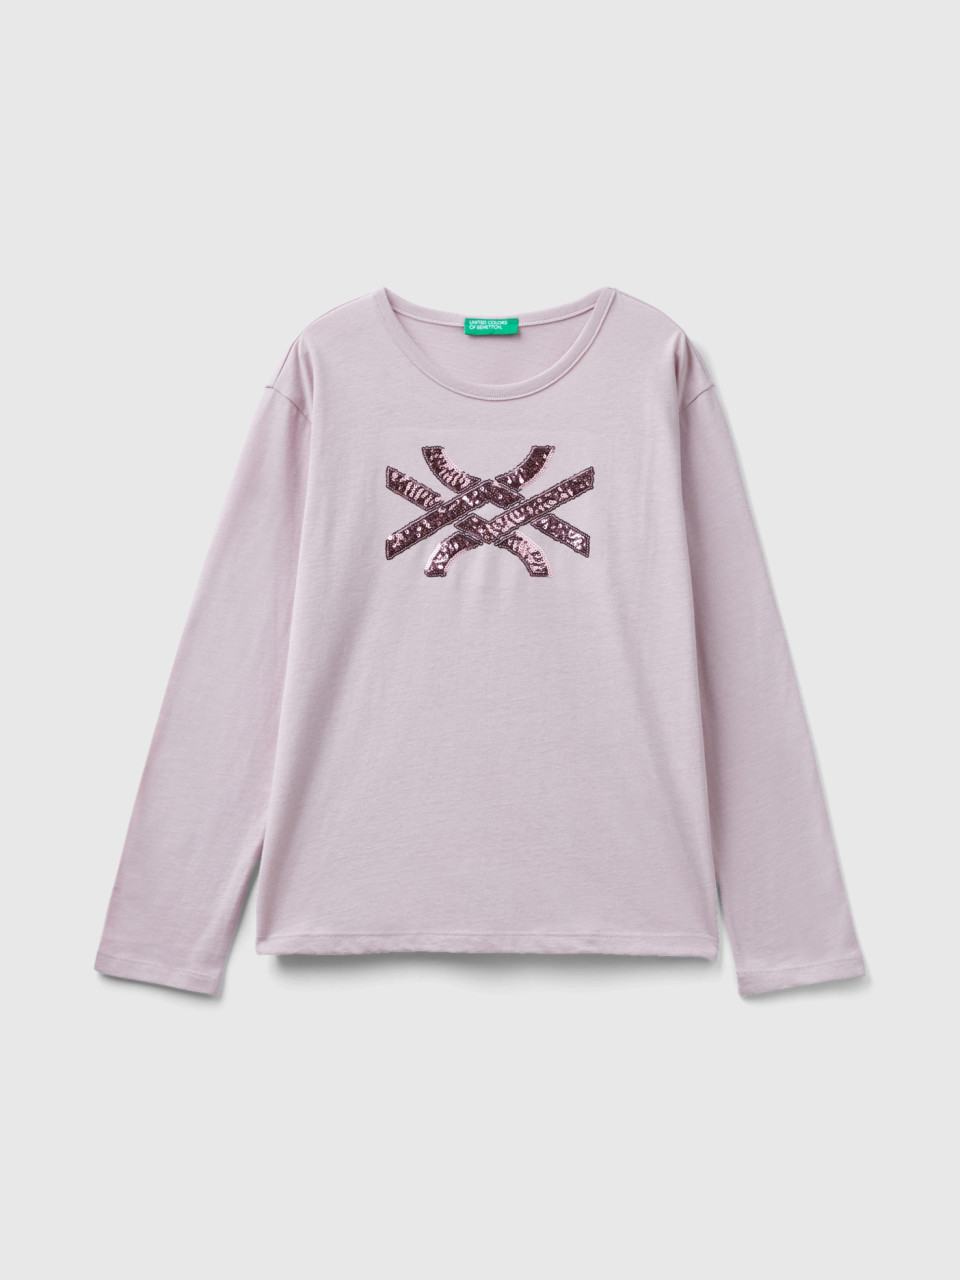 Benetton, T-shirt In Warm Organic Cotton With Sequins, Pink, Kids